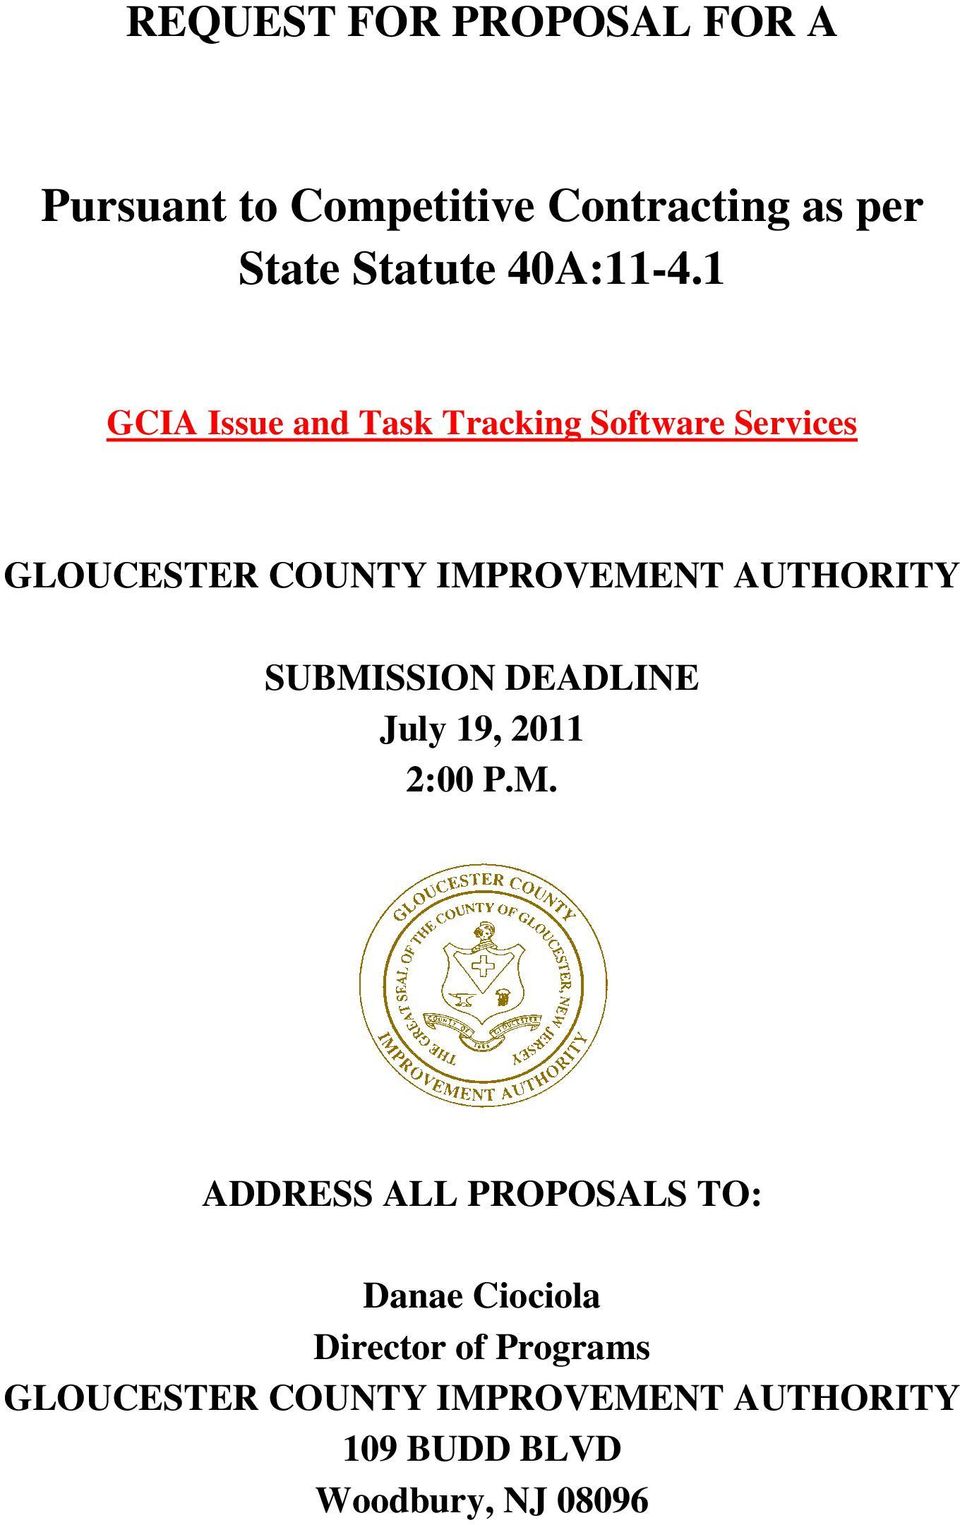 1 GCIA Issue and Task Tracking Software Services GLOUCESTER COUNTY IMPROVEMENT AUTHORITY